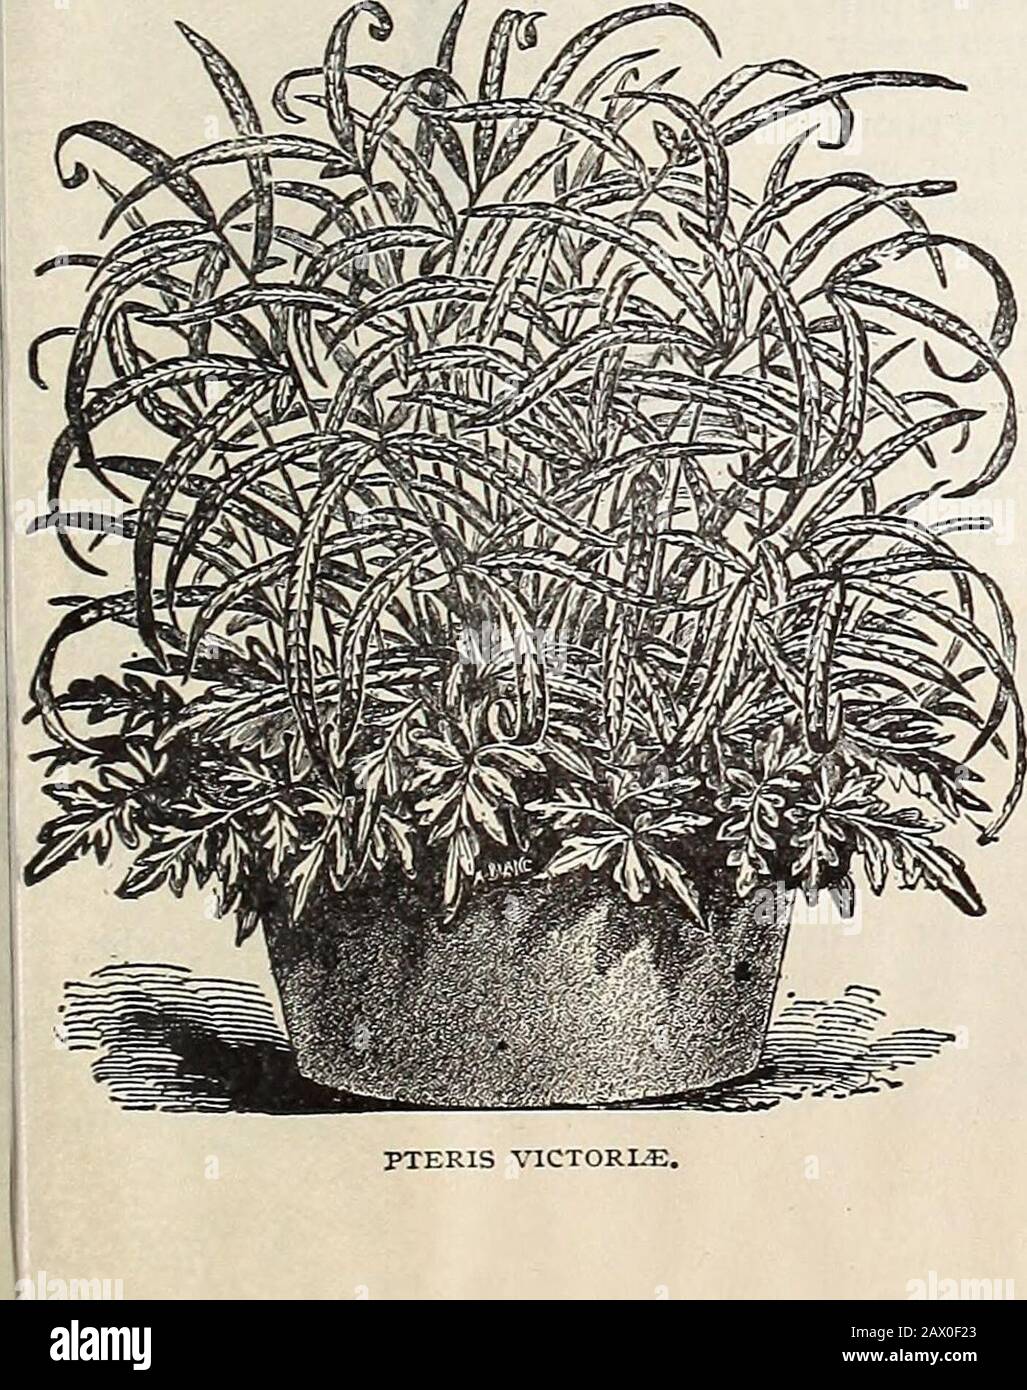 Cox seed and plant cocatalogue . diantum Cuneatum -This fine species is moregenerally grown than any other, and is one of themost beautiful. Each 25 to 50 cents. Gracillimum—Smallest and most graceful Maiden-Hair. 25 cents. Wiegandi— A pretty little species, with peculiarlycrested and overlapping pinnae. 25 cents. Davaliia Bullata—We offer this grand Fern pre-pared in globe shape ready for hanging up. In ashort time they develop leaves and make splendidornaments through the season, suspended on thepiazza or in a window. Price, $1.00 each; small plants25 cents. Davaliia Stricta—One of the fines Stock Photo